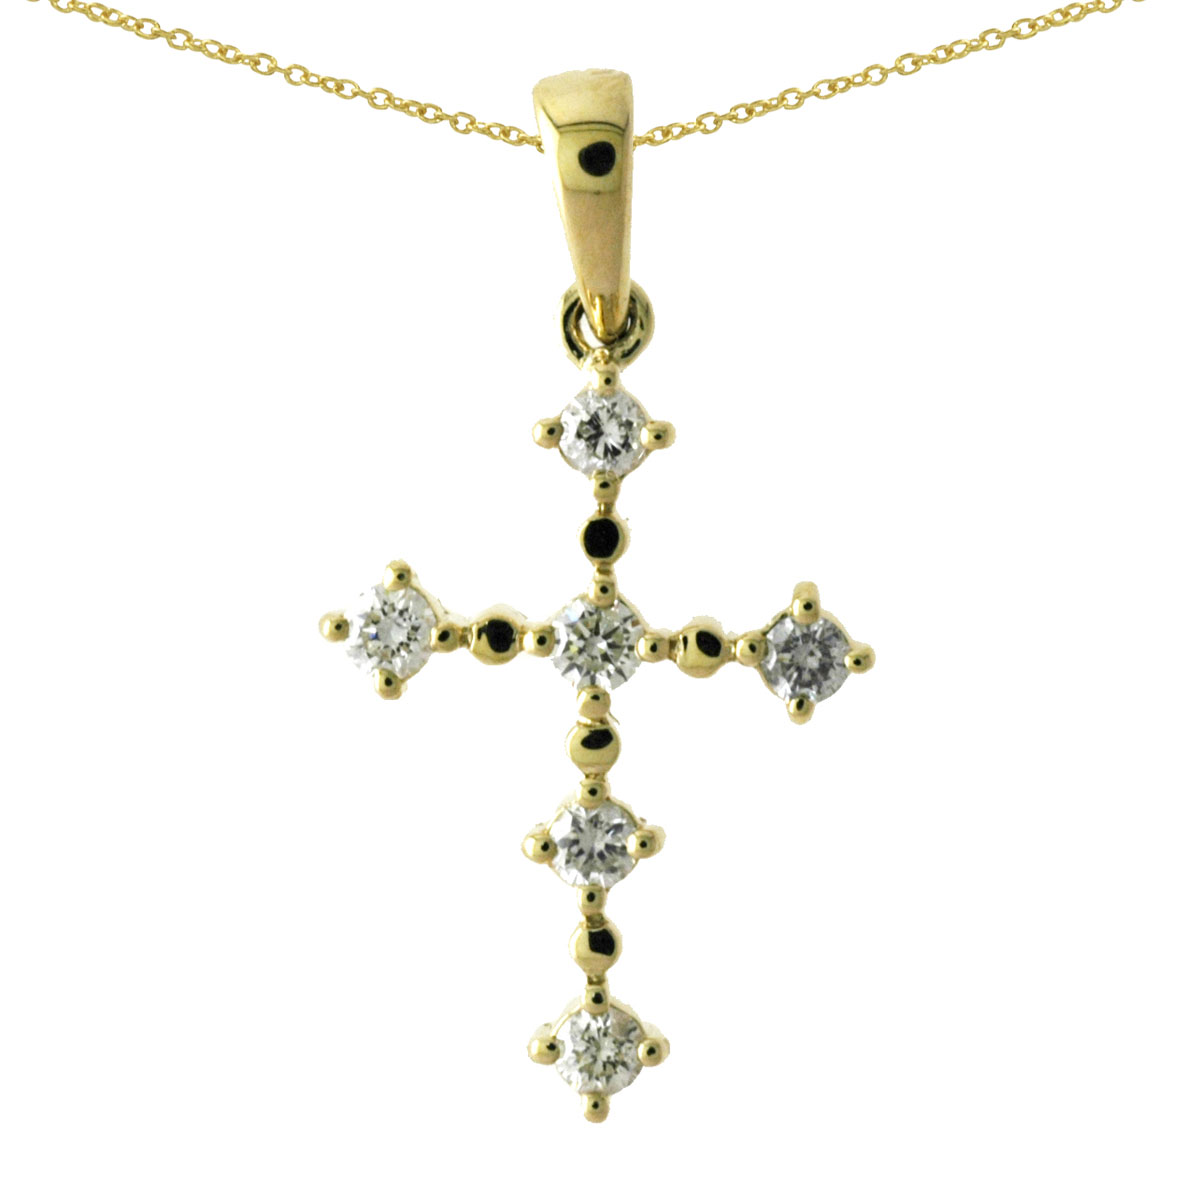 14k yellow gold cross featuring .25 total ct diamonds. A modern take on a classic design.